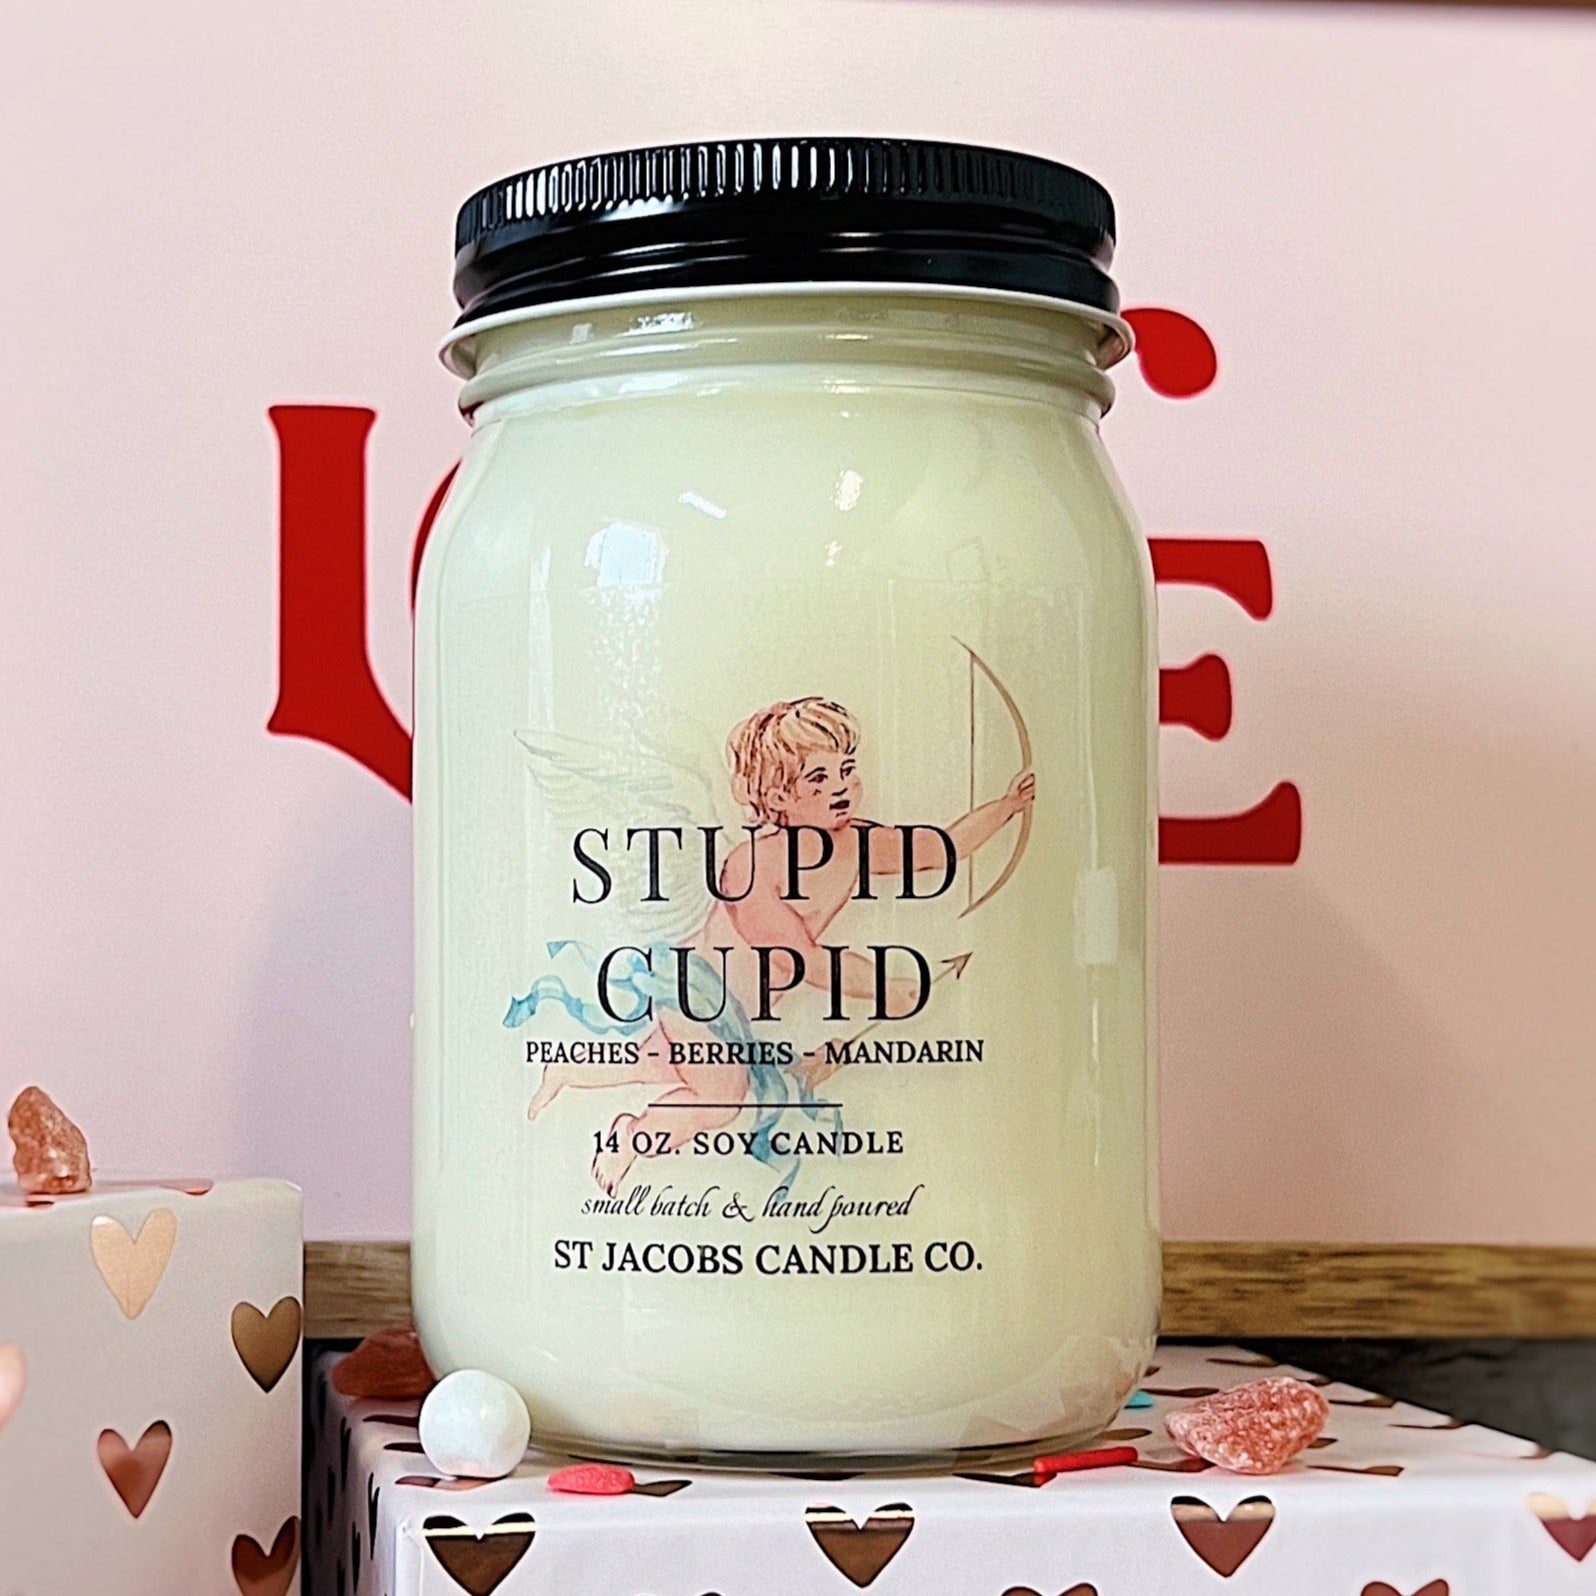 "STUPID CUPID" Natural Soy Candle